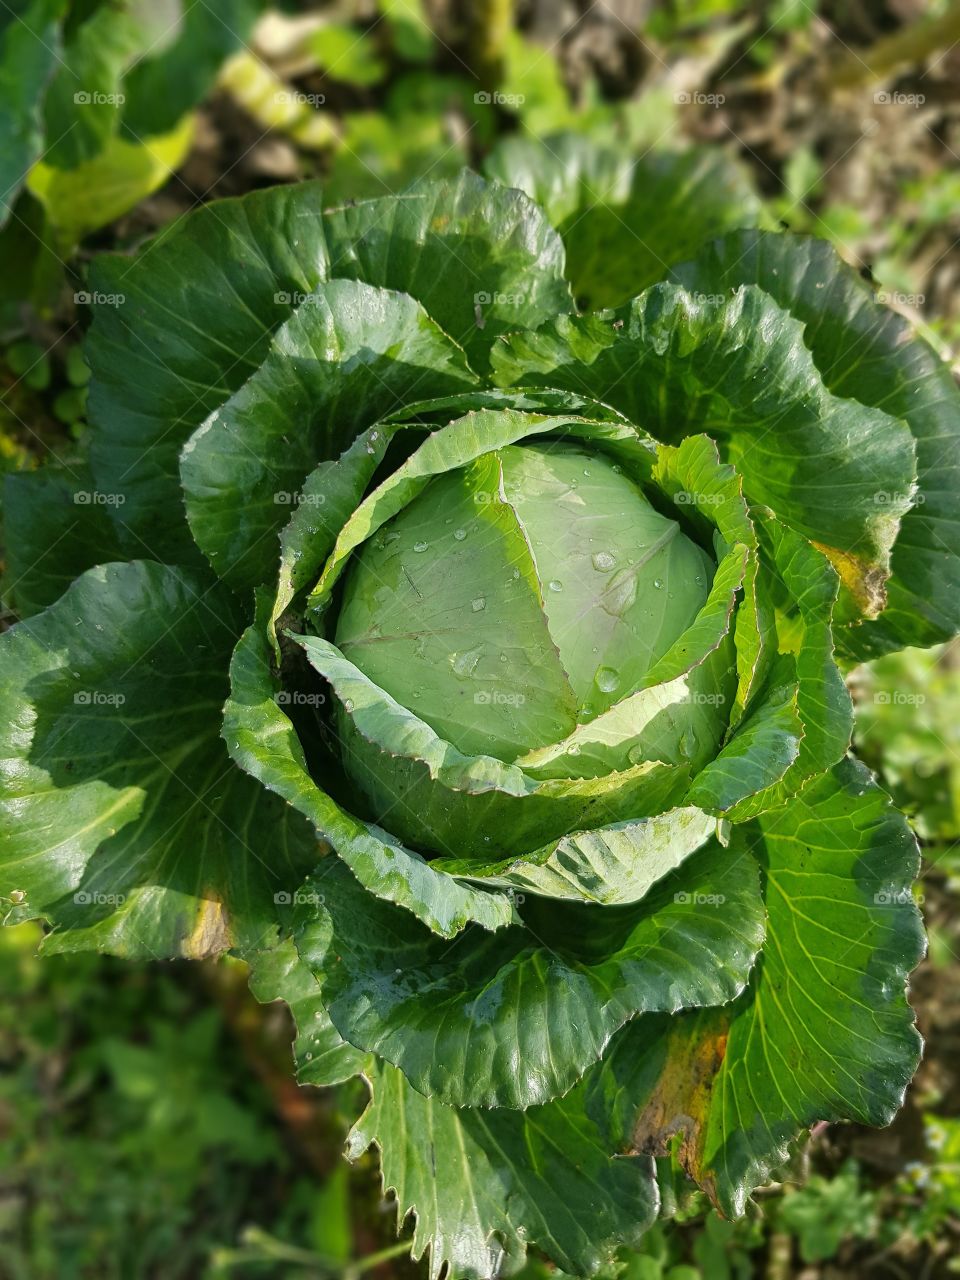 Cabbage with dew in the vegetable garden